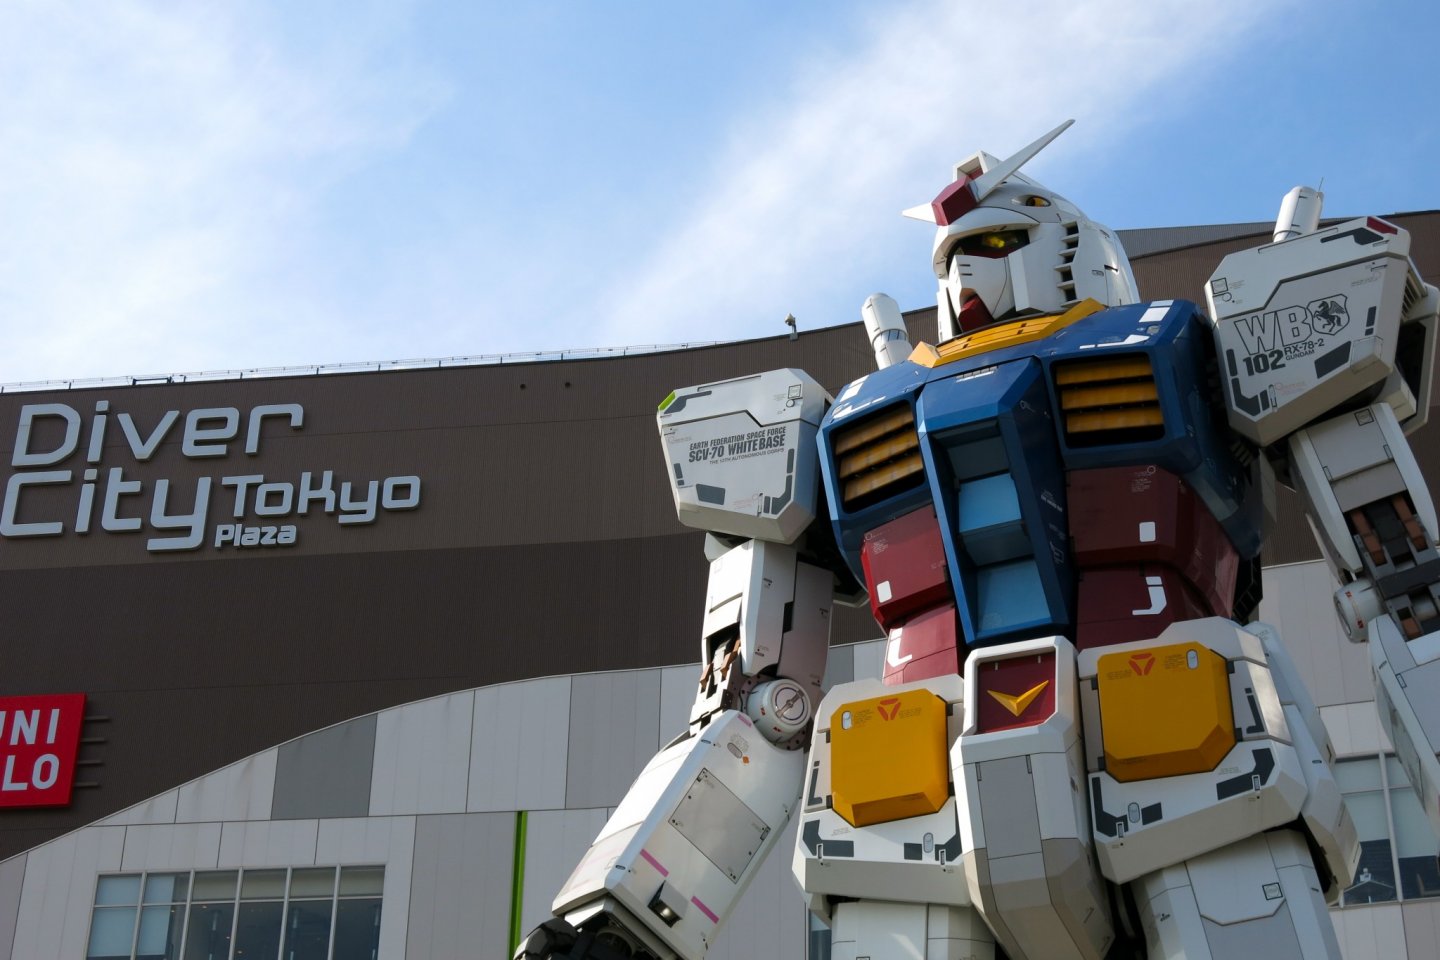 Gundam statue "RG 1/1 RX-78-2 Gundam Ver. GFT" not only has a commanding stance in front of Diver City Tokyo, its head rotates in various directions!